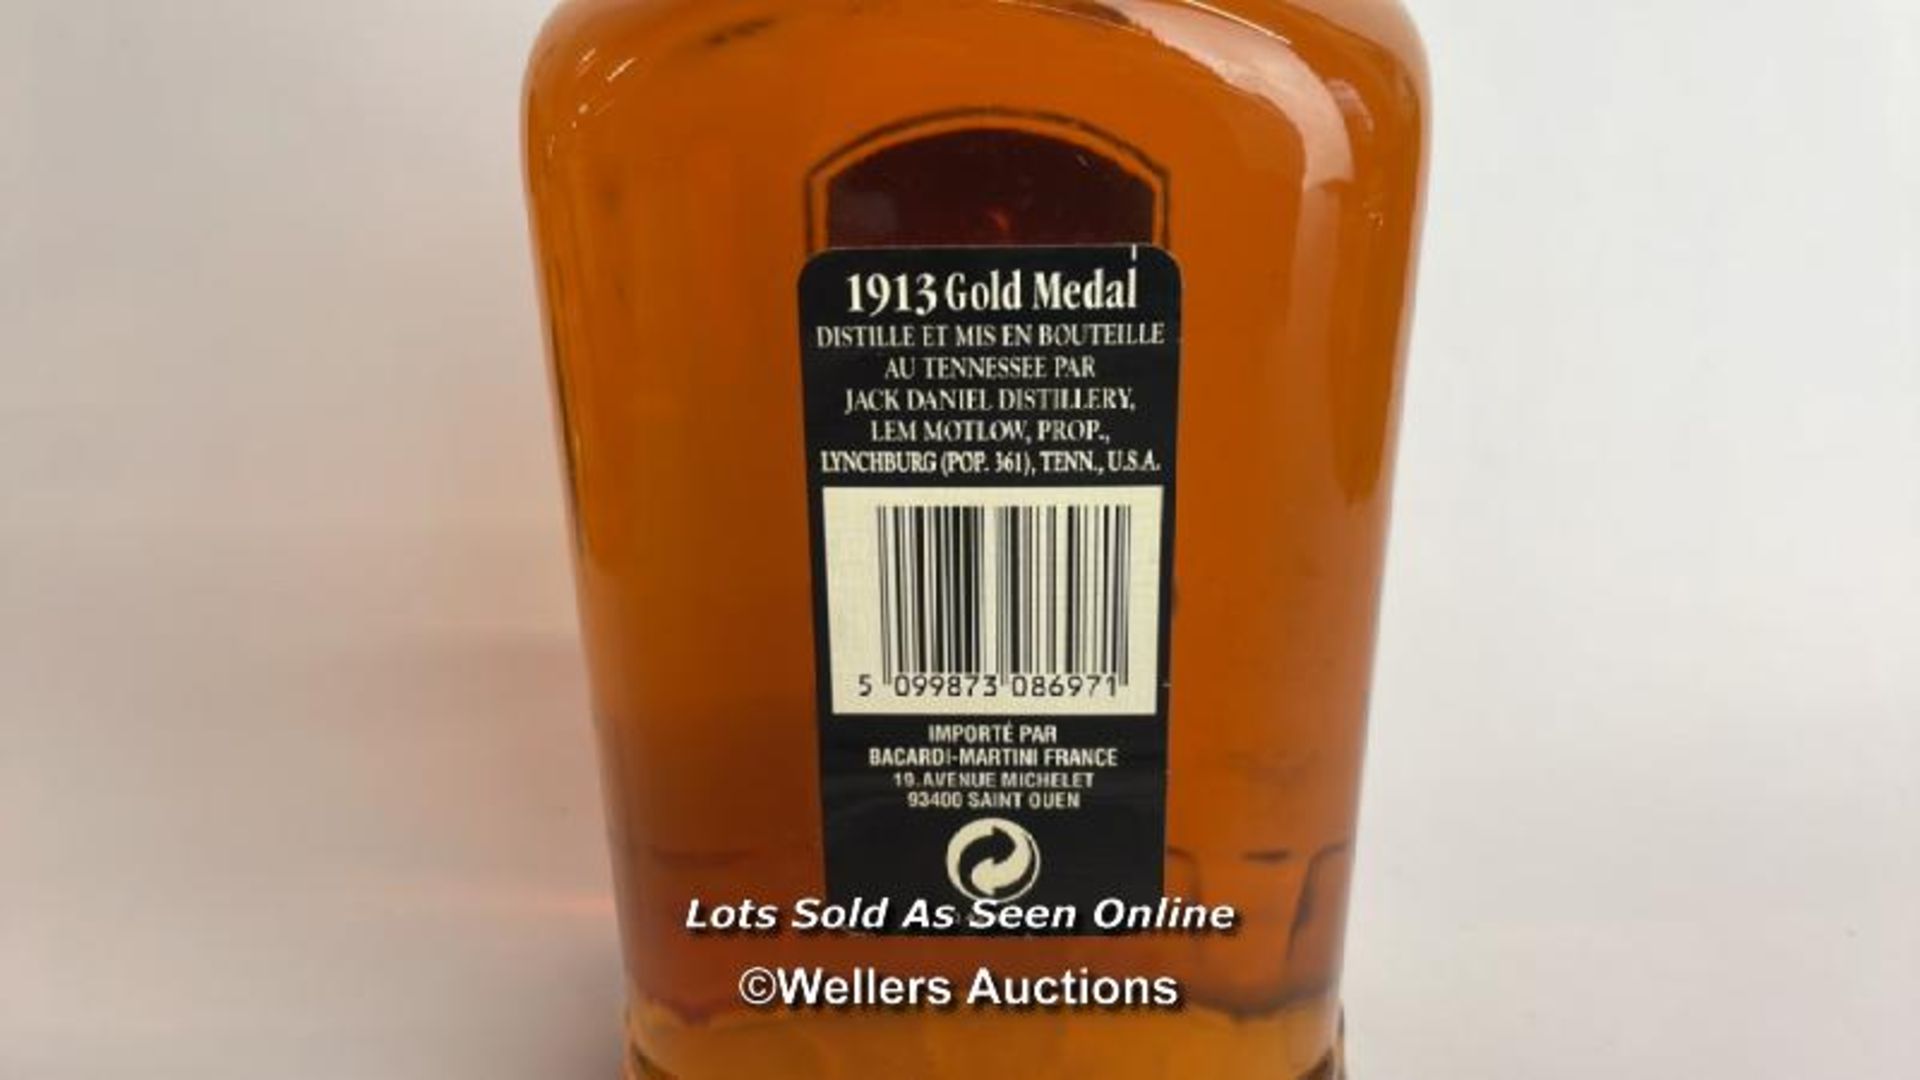 1913 Jack Daniels Tennesse Whiskey Gold Medal, 75cl, 43% vol / Please see images for fill level - Image 6 of 6